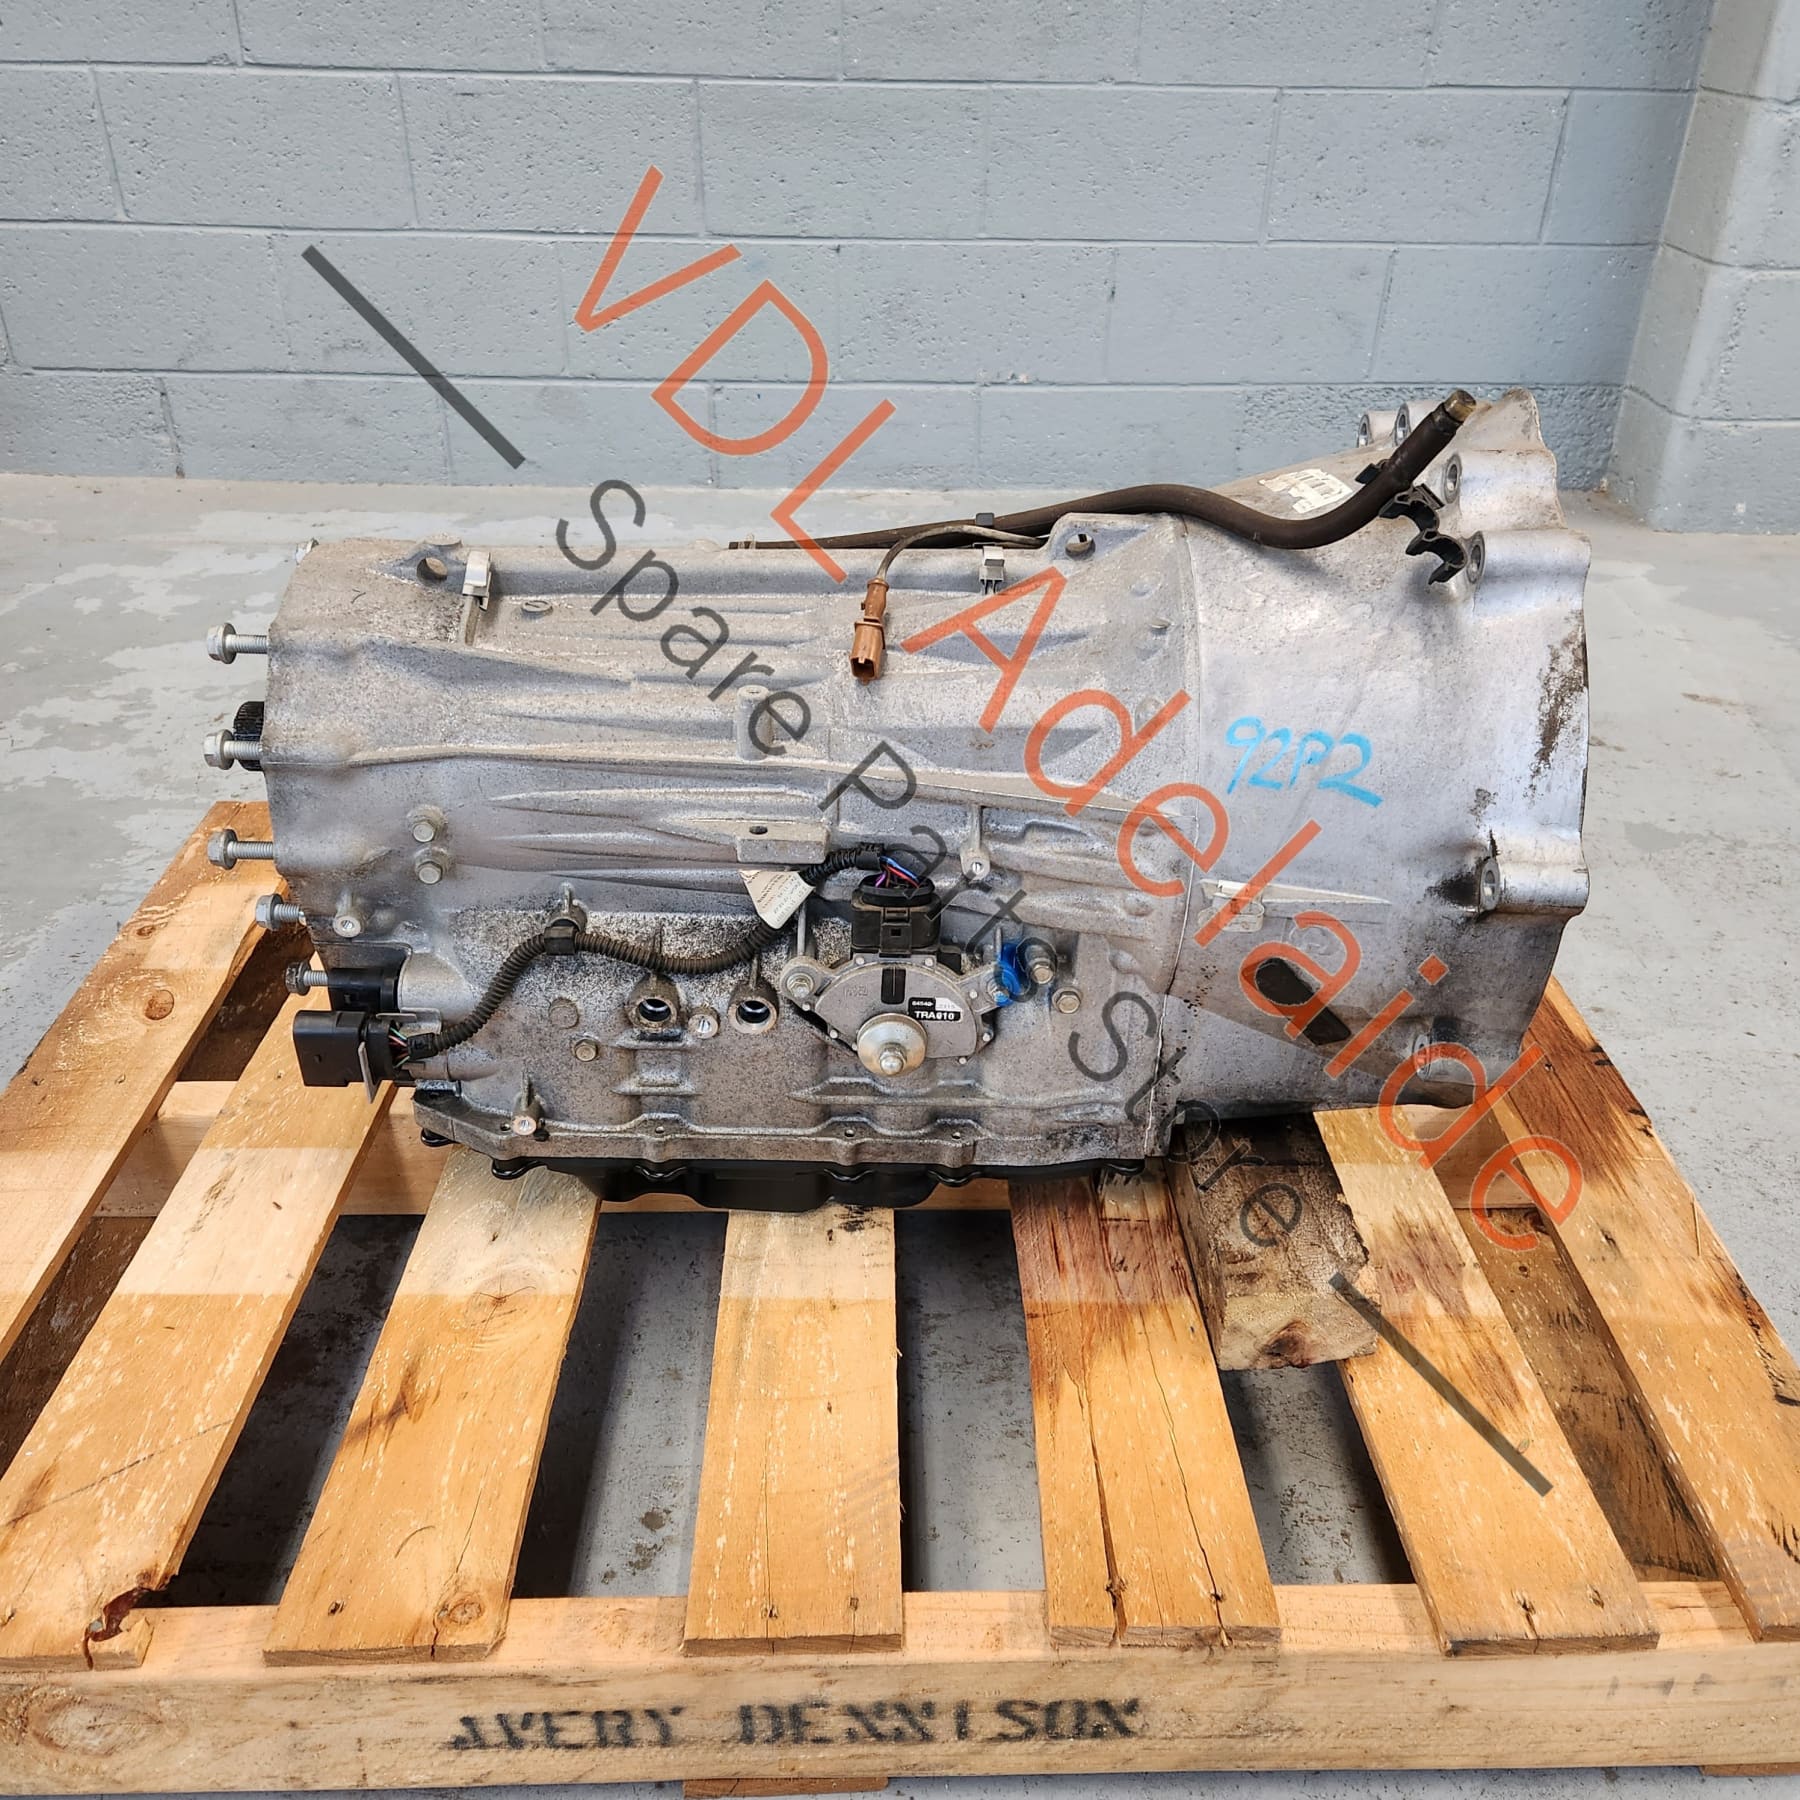 95530001128 95530001129 95530001130 95530001131 Porsche Cayenne 9PA 955 957 GTS 6 Speed Automatic Auto Transmission Gearbox A4802 TR60SN